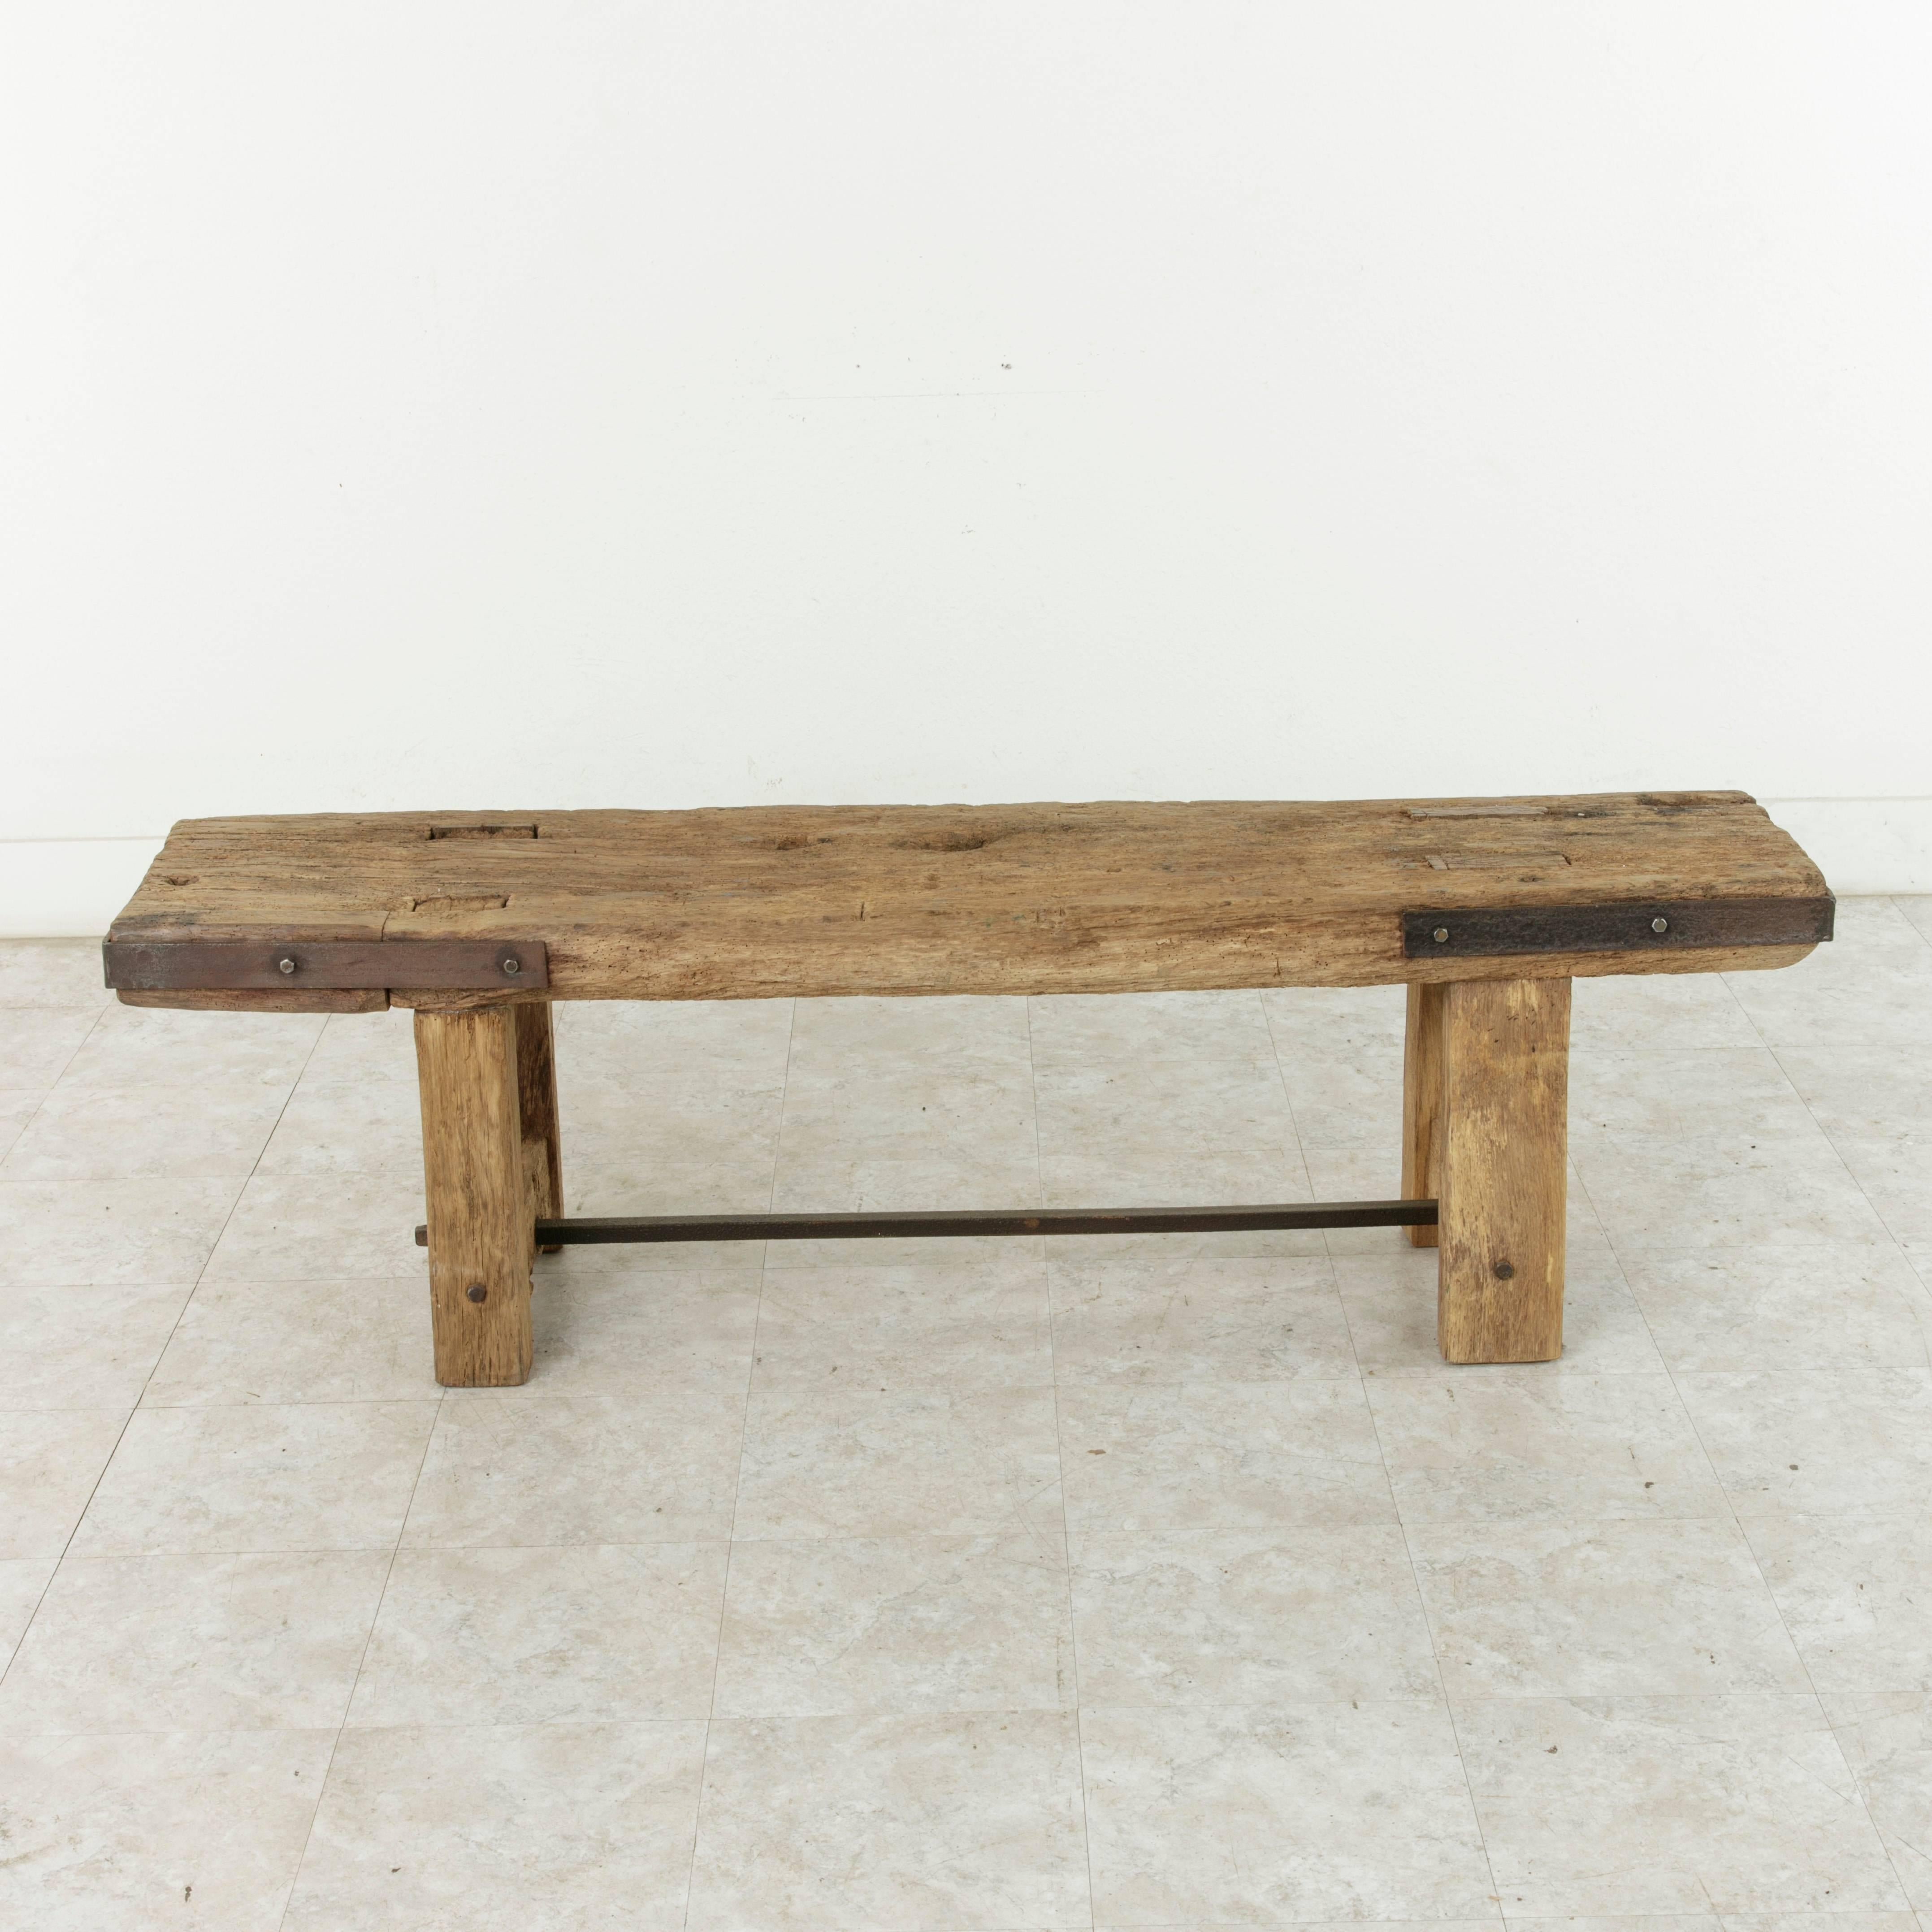 Originally used on a French farm for butchering, this long 19th century rustic oak bench features a four inch thick plank for the seat and is capped on both ends with an iron strap. The sturdy legs are constructed using mortise and tenon joinery and